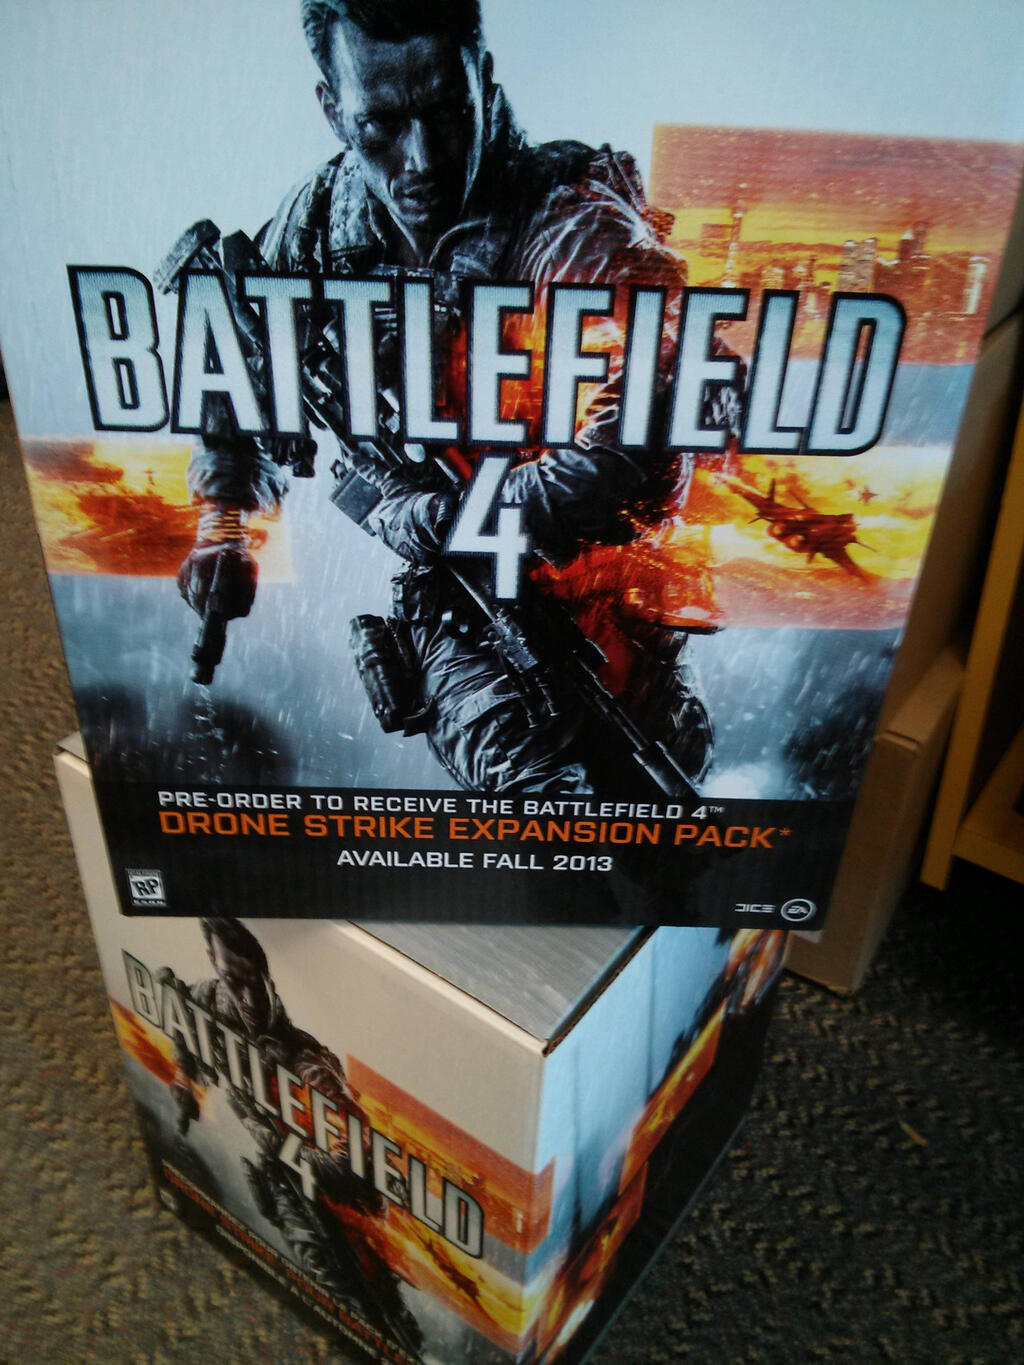 Rumor: Drone Strike. First Battlefield 4 Expansion Pack revealed.